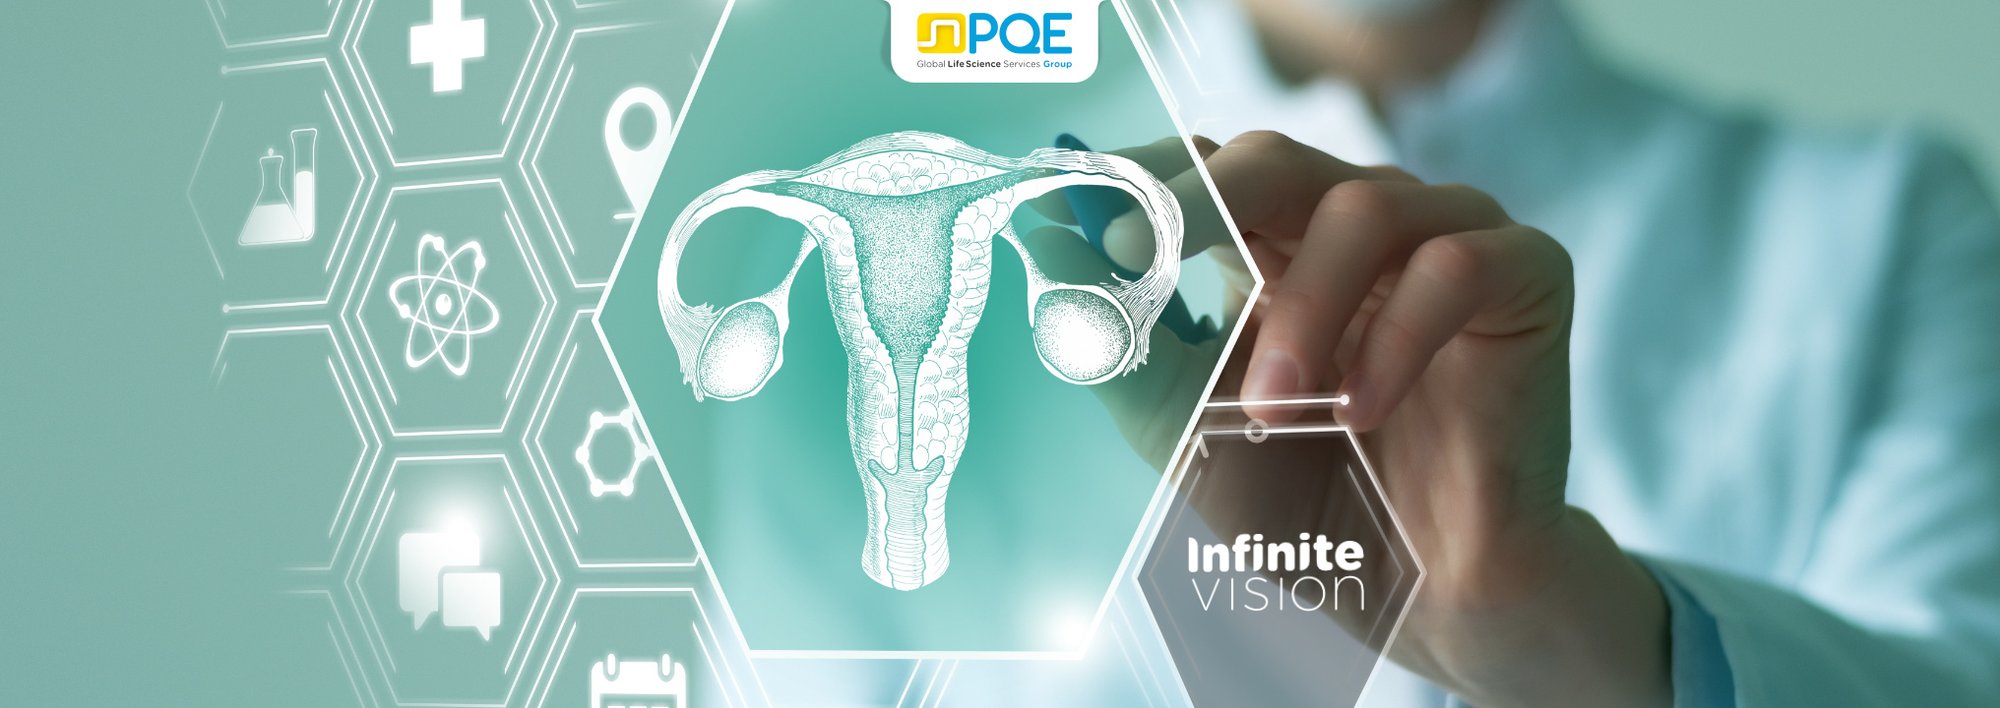 banner insghits-Infinite Visions FutureInsite® Is The Next Big Thing In Femtech and Personalized endometriosis Care, Here’s Why _10